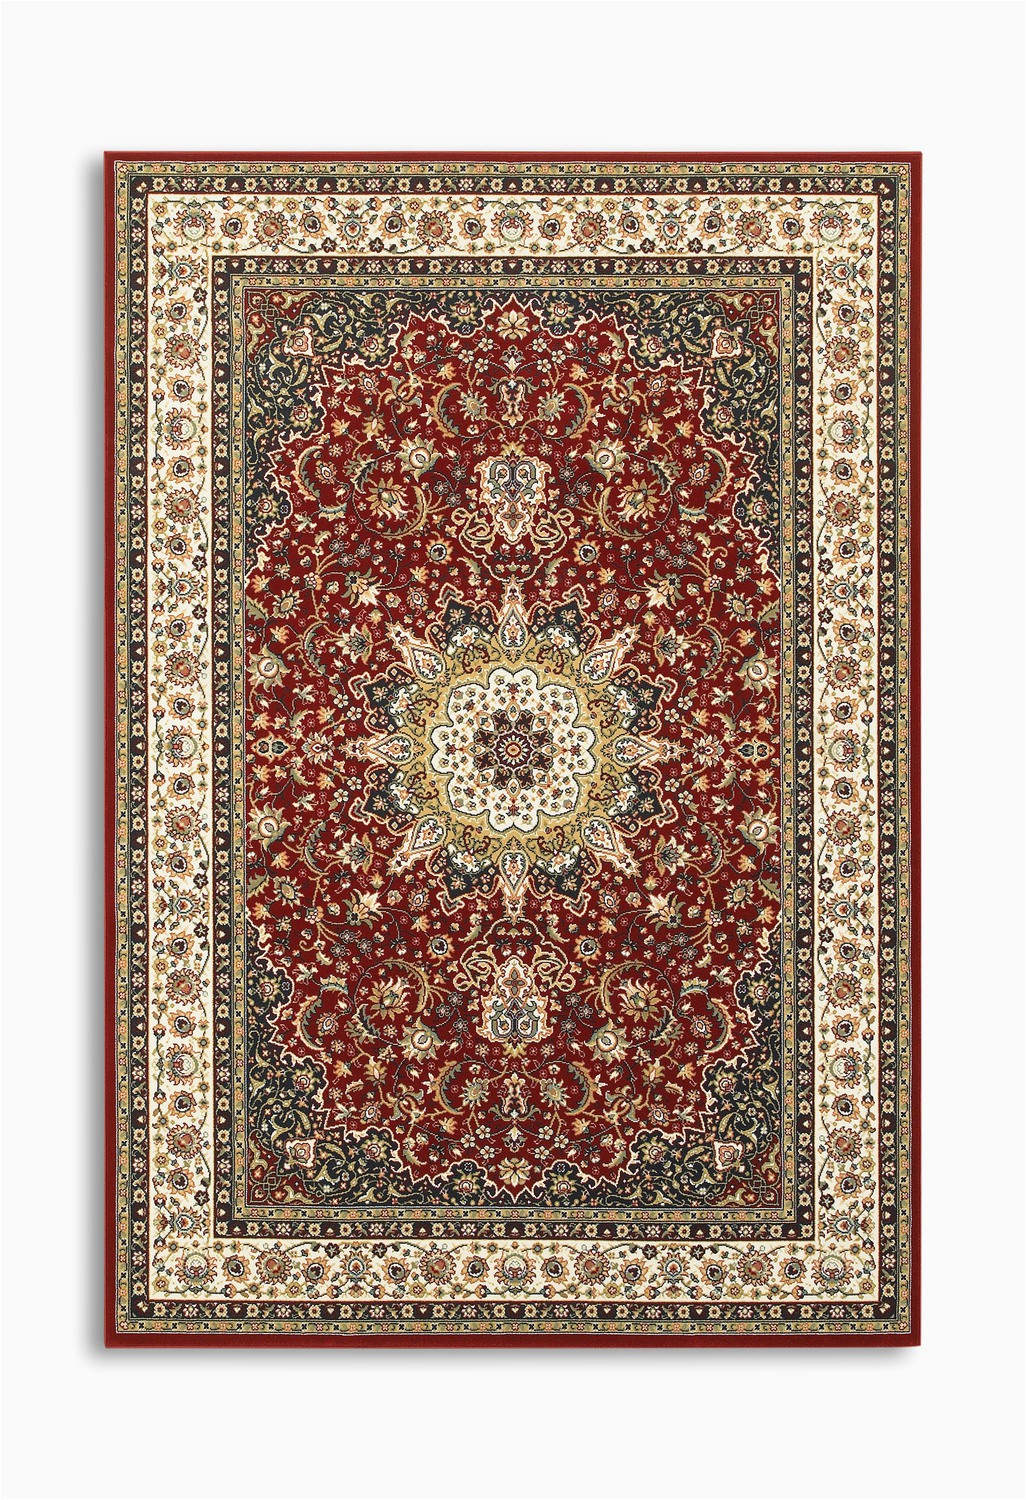 Cheap 10 by 12 area Rugs Kashan Red Alabaster area Rug